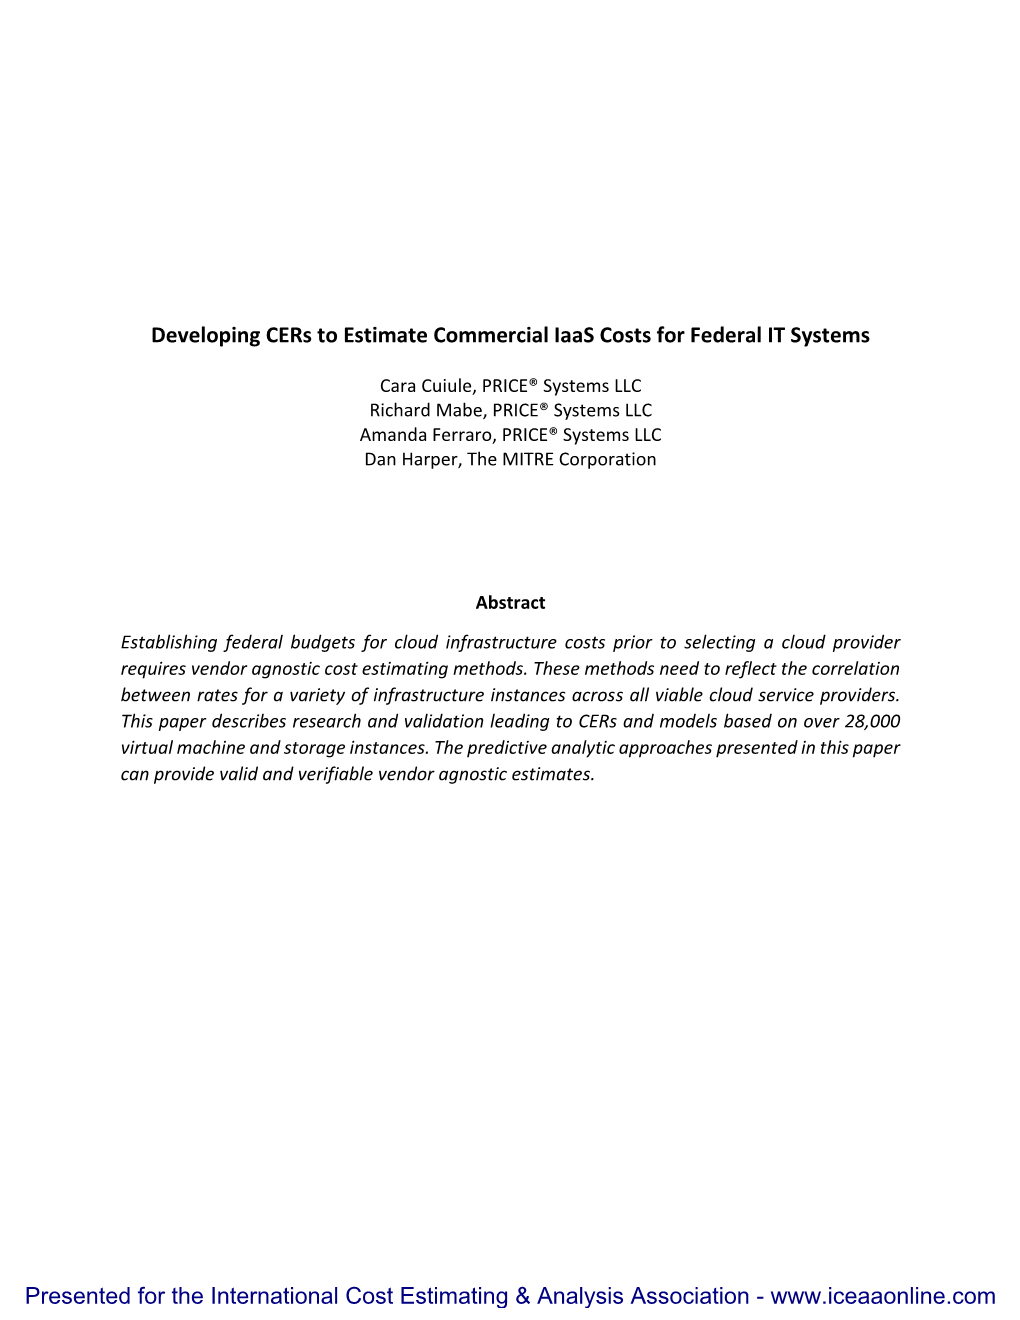 Developing Cers to Estimate Commercial Iaas Costs for Federal IT Systems